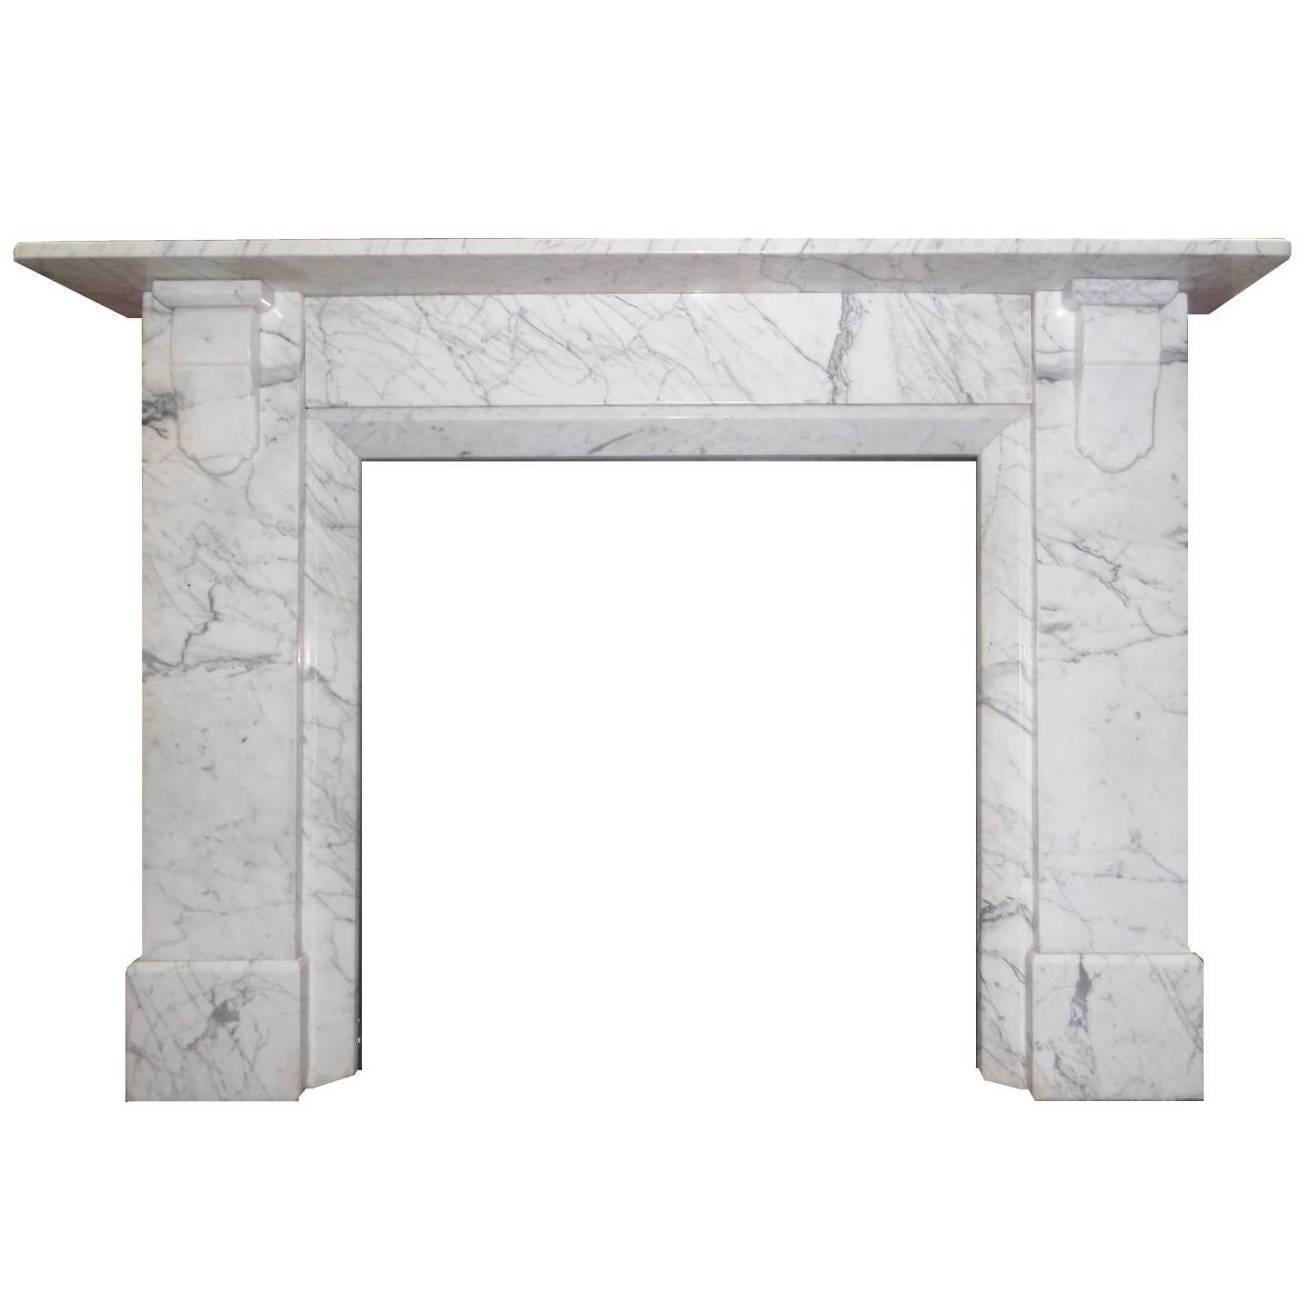 Early 20th Century Edwardian Carrara Marble Chimney Piece Surround For Sale